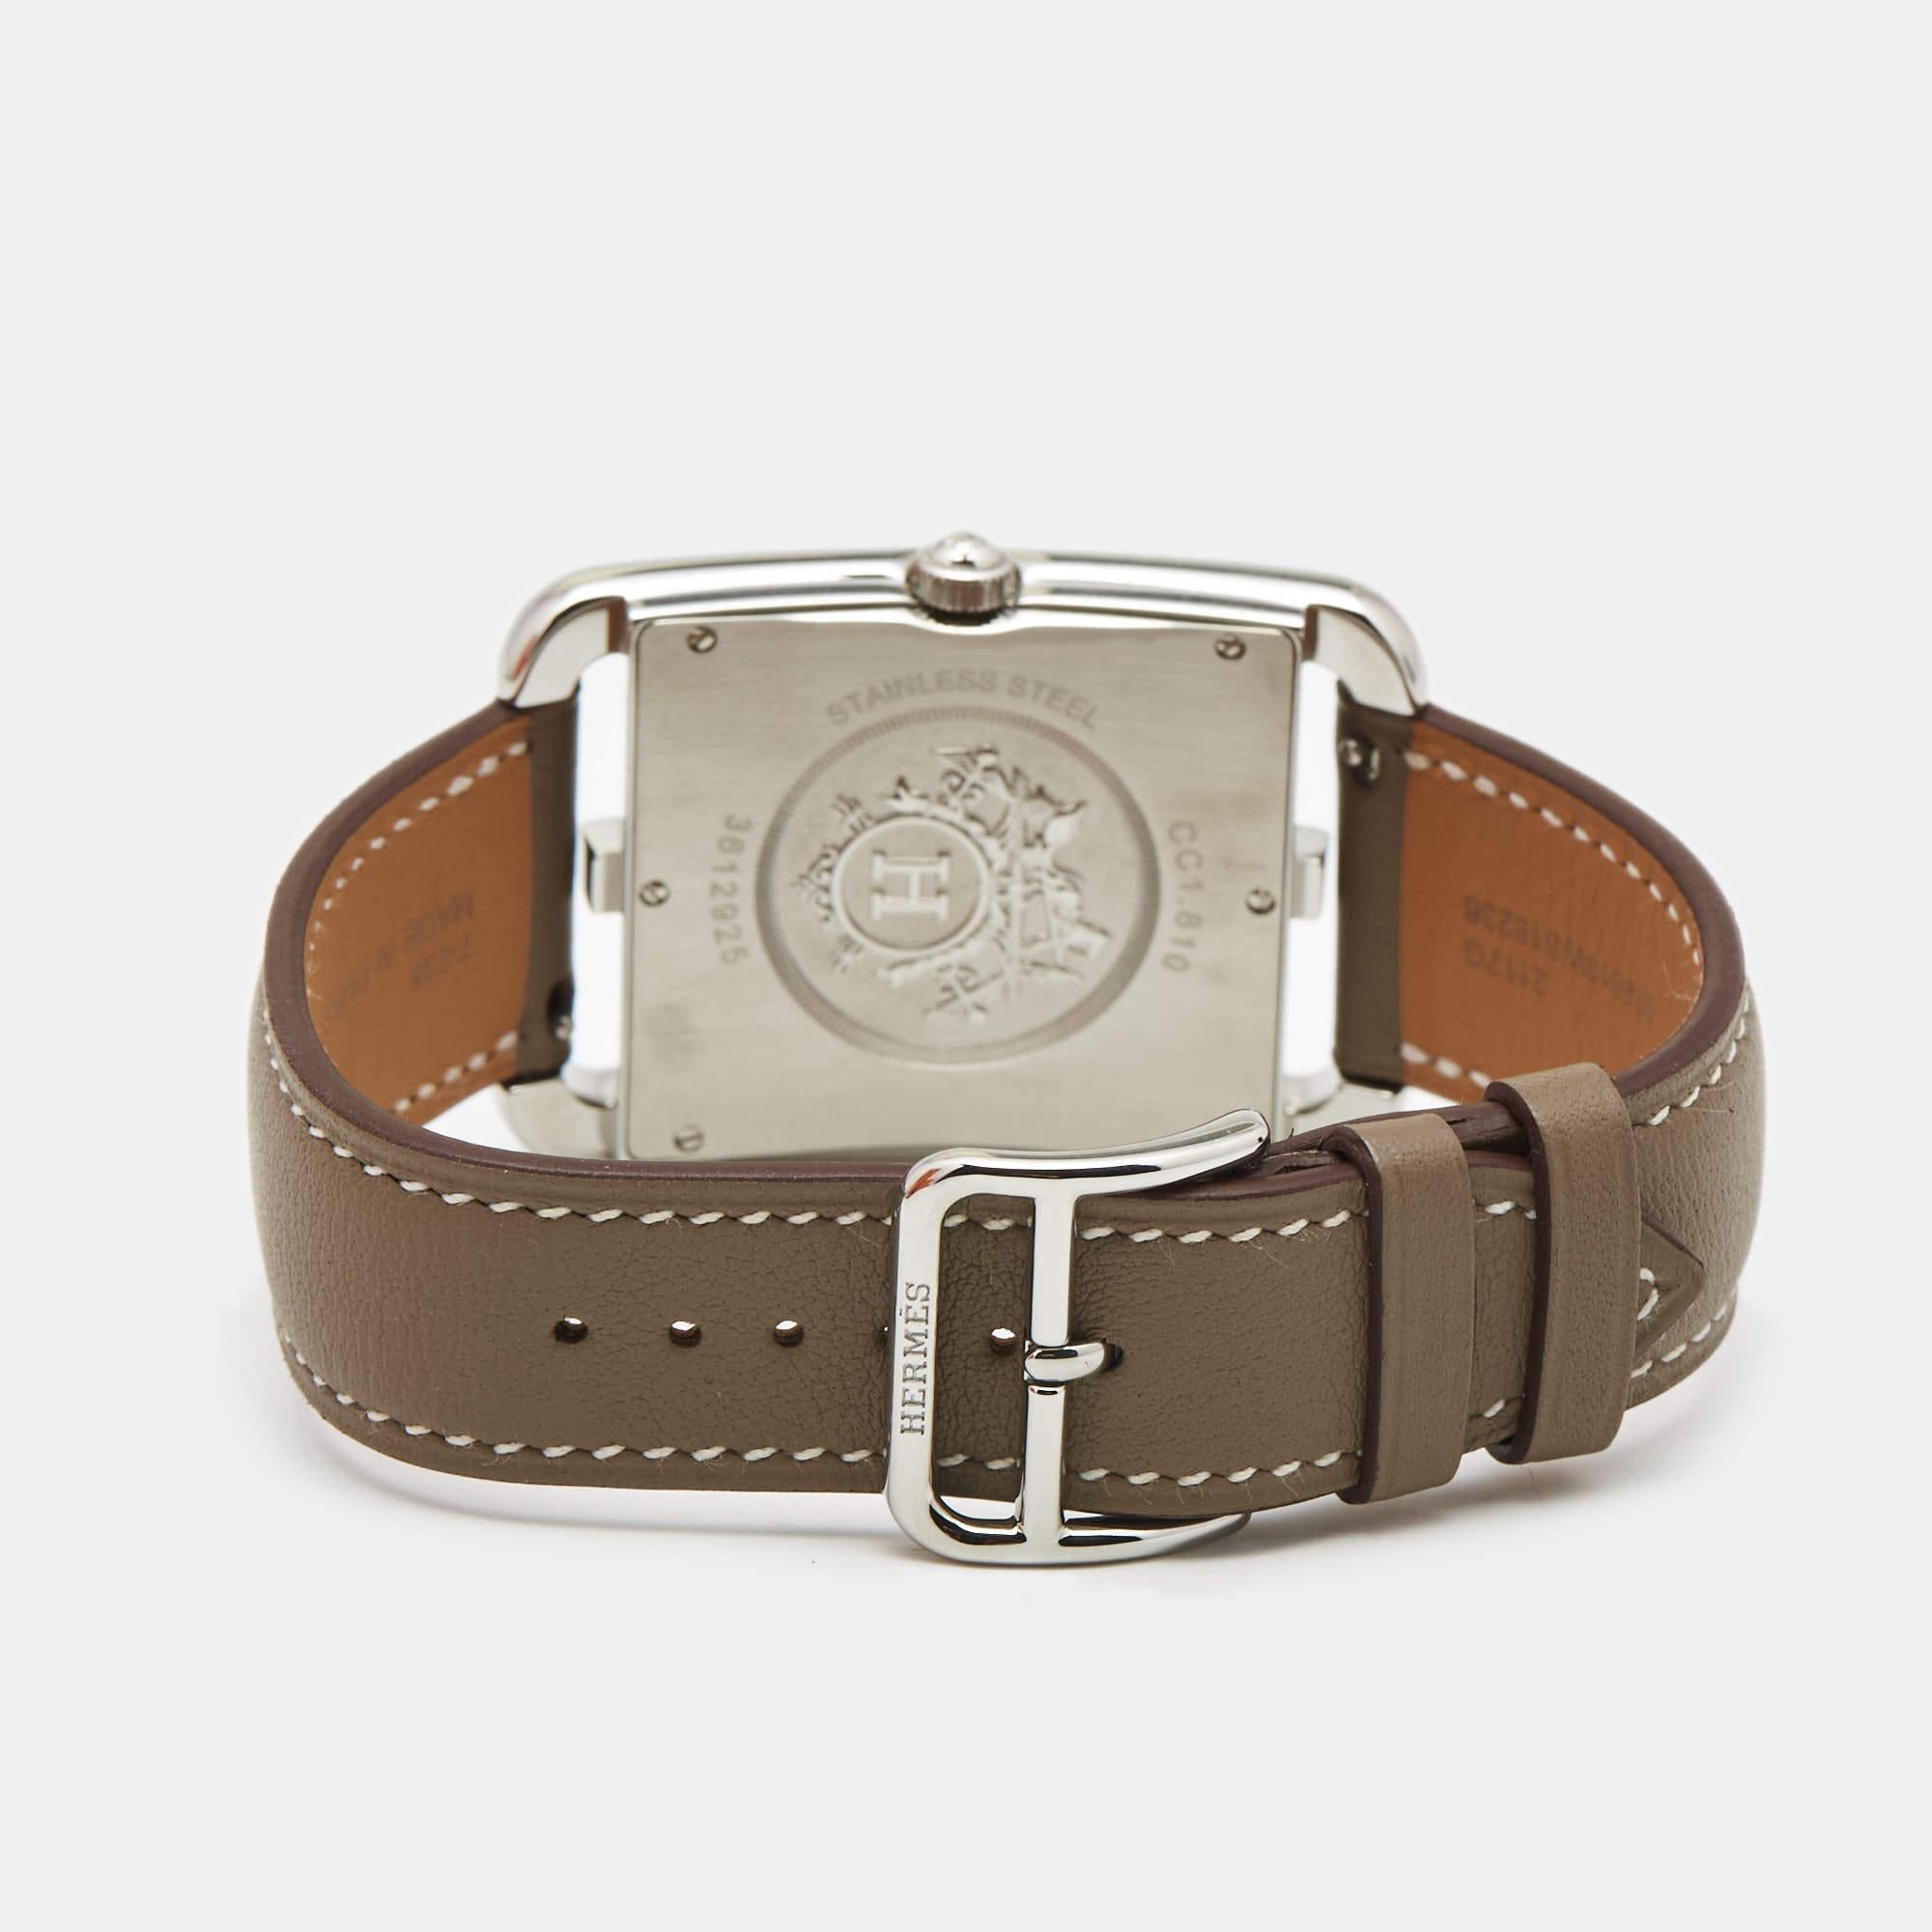 This Cape Cod watch from Hermes stands for quality and sophistication. The watch features a stainless steel case held by a leather strap that can be around your wrist and secured with a buckle. Powered by a quartz movement, this elegant timepiece